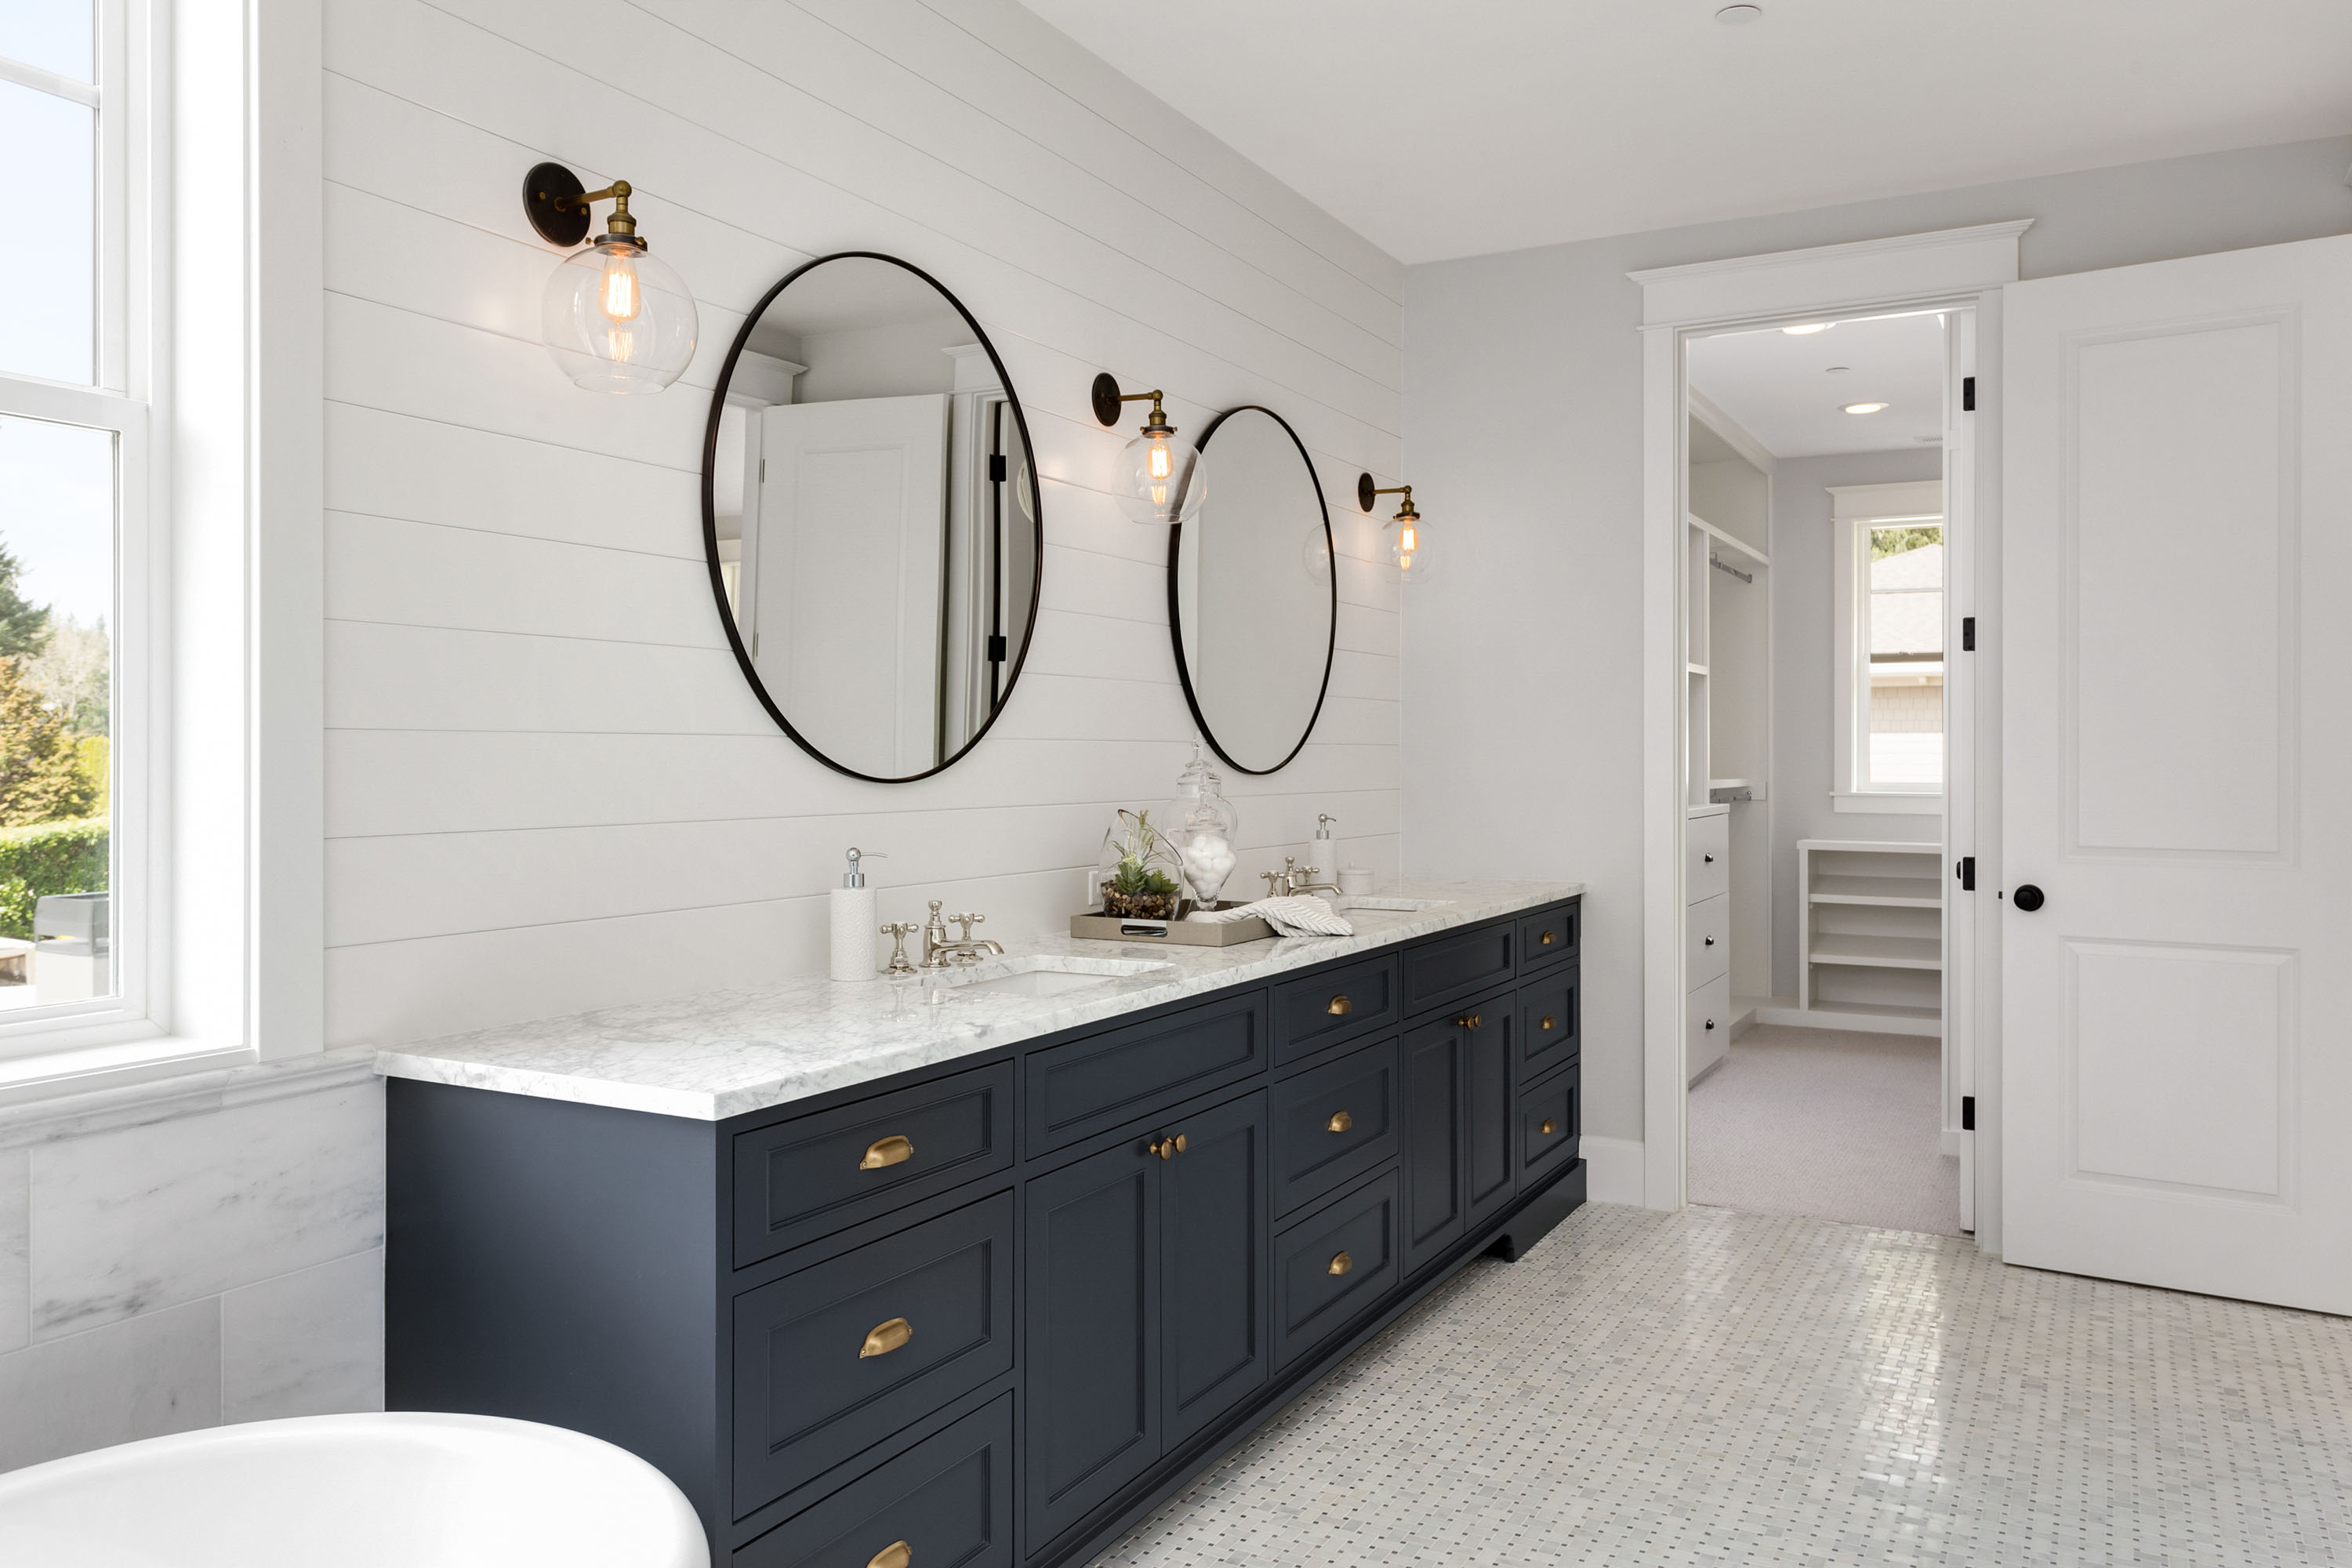 Best Bathroom Paints 6 Moisture, What Type Of Paint To Use In Bathroom